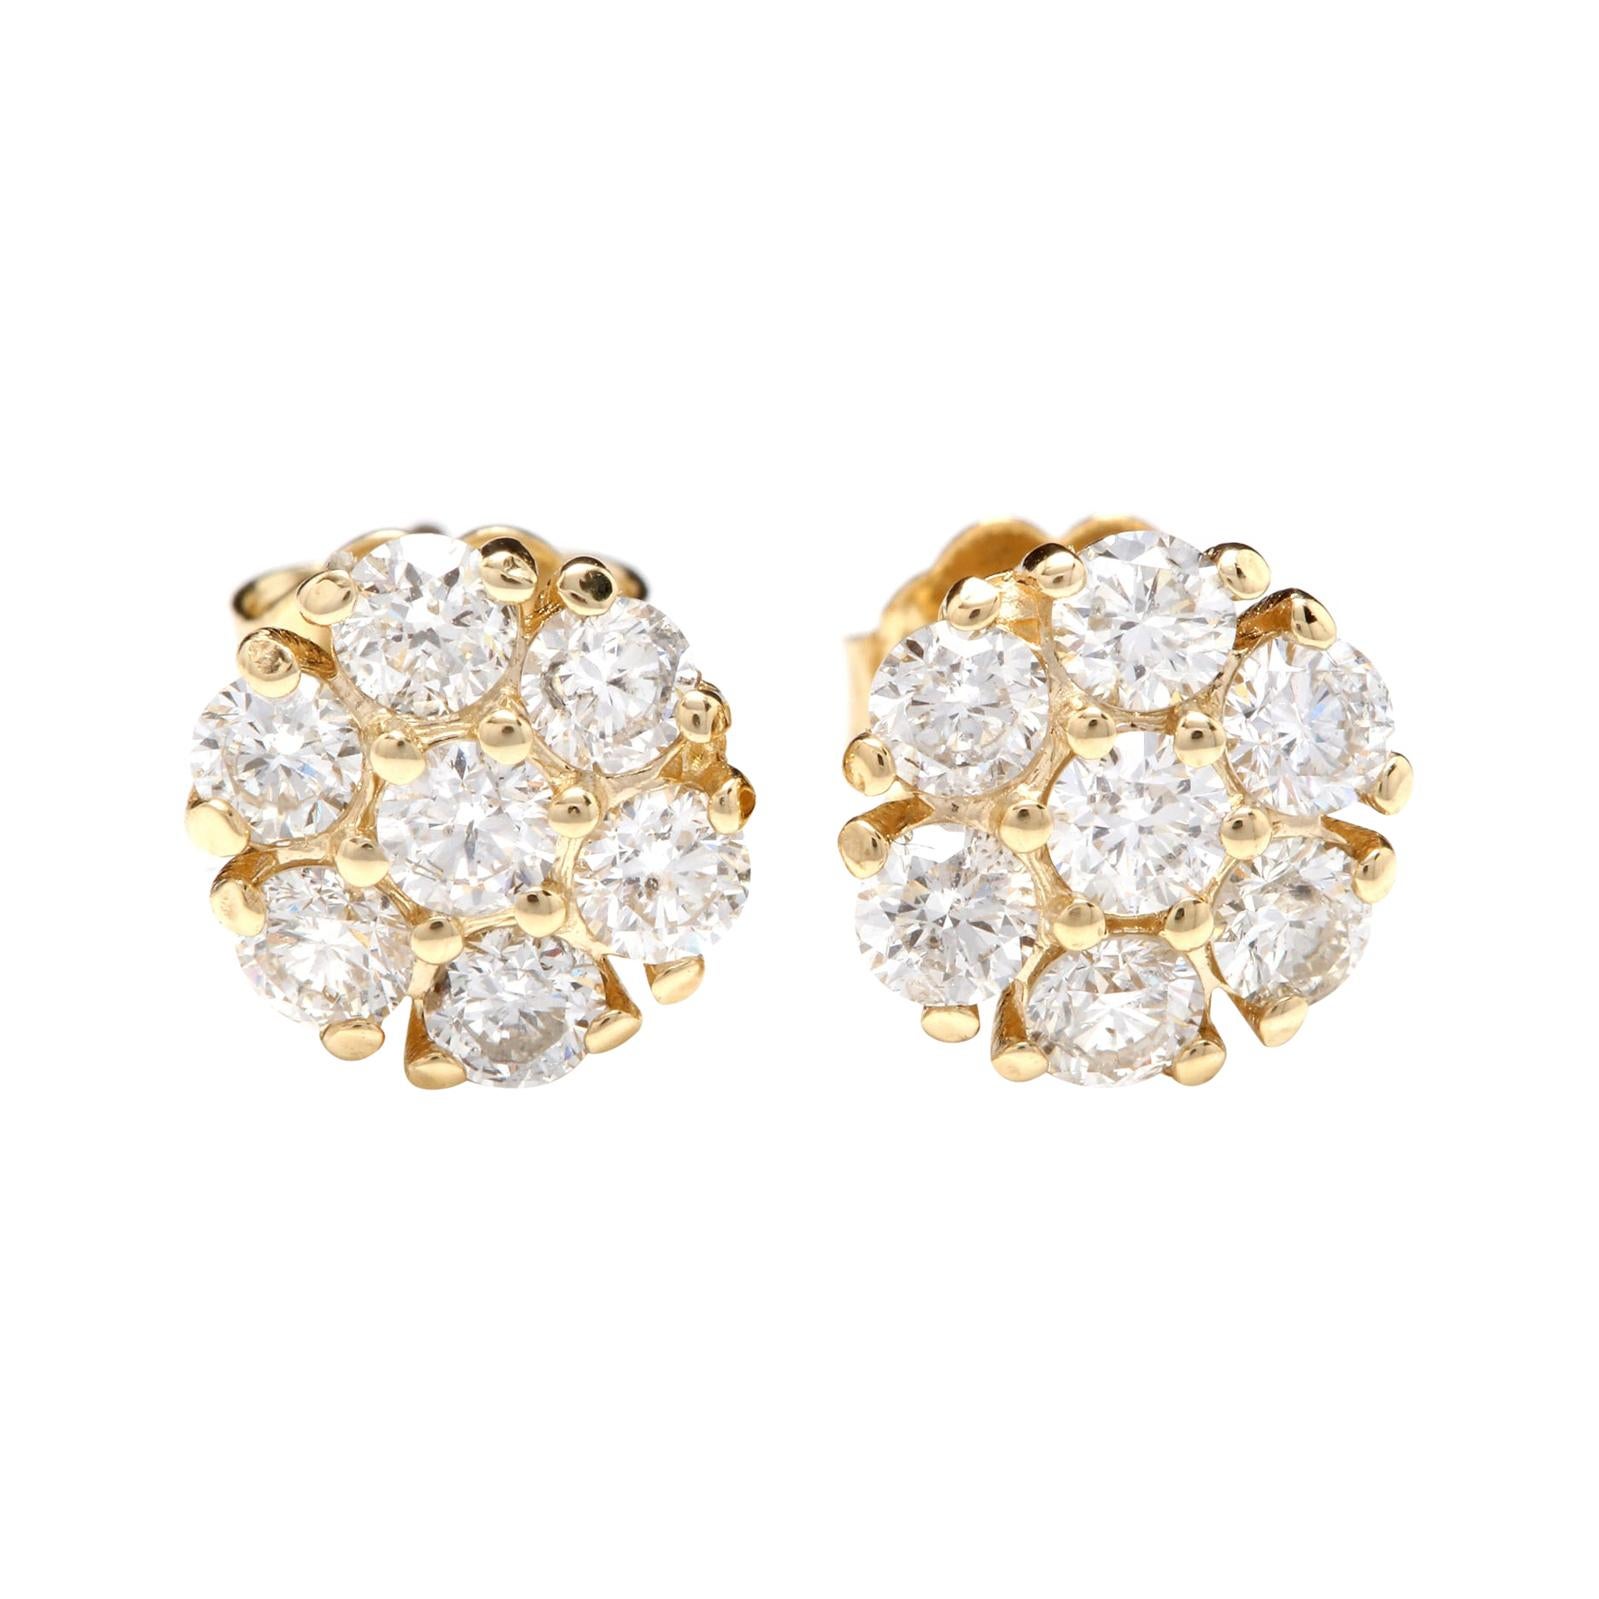 Exquisite 1.00 Carat Natural VS1-VS2 Diamond 14 Karat Solid Yellow Gold Earrings For Sale